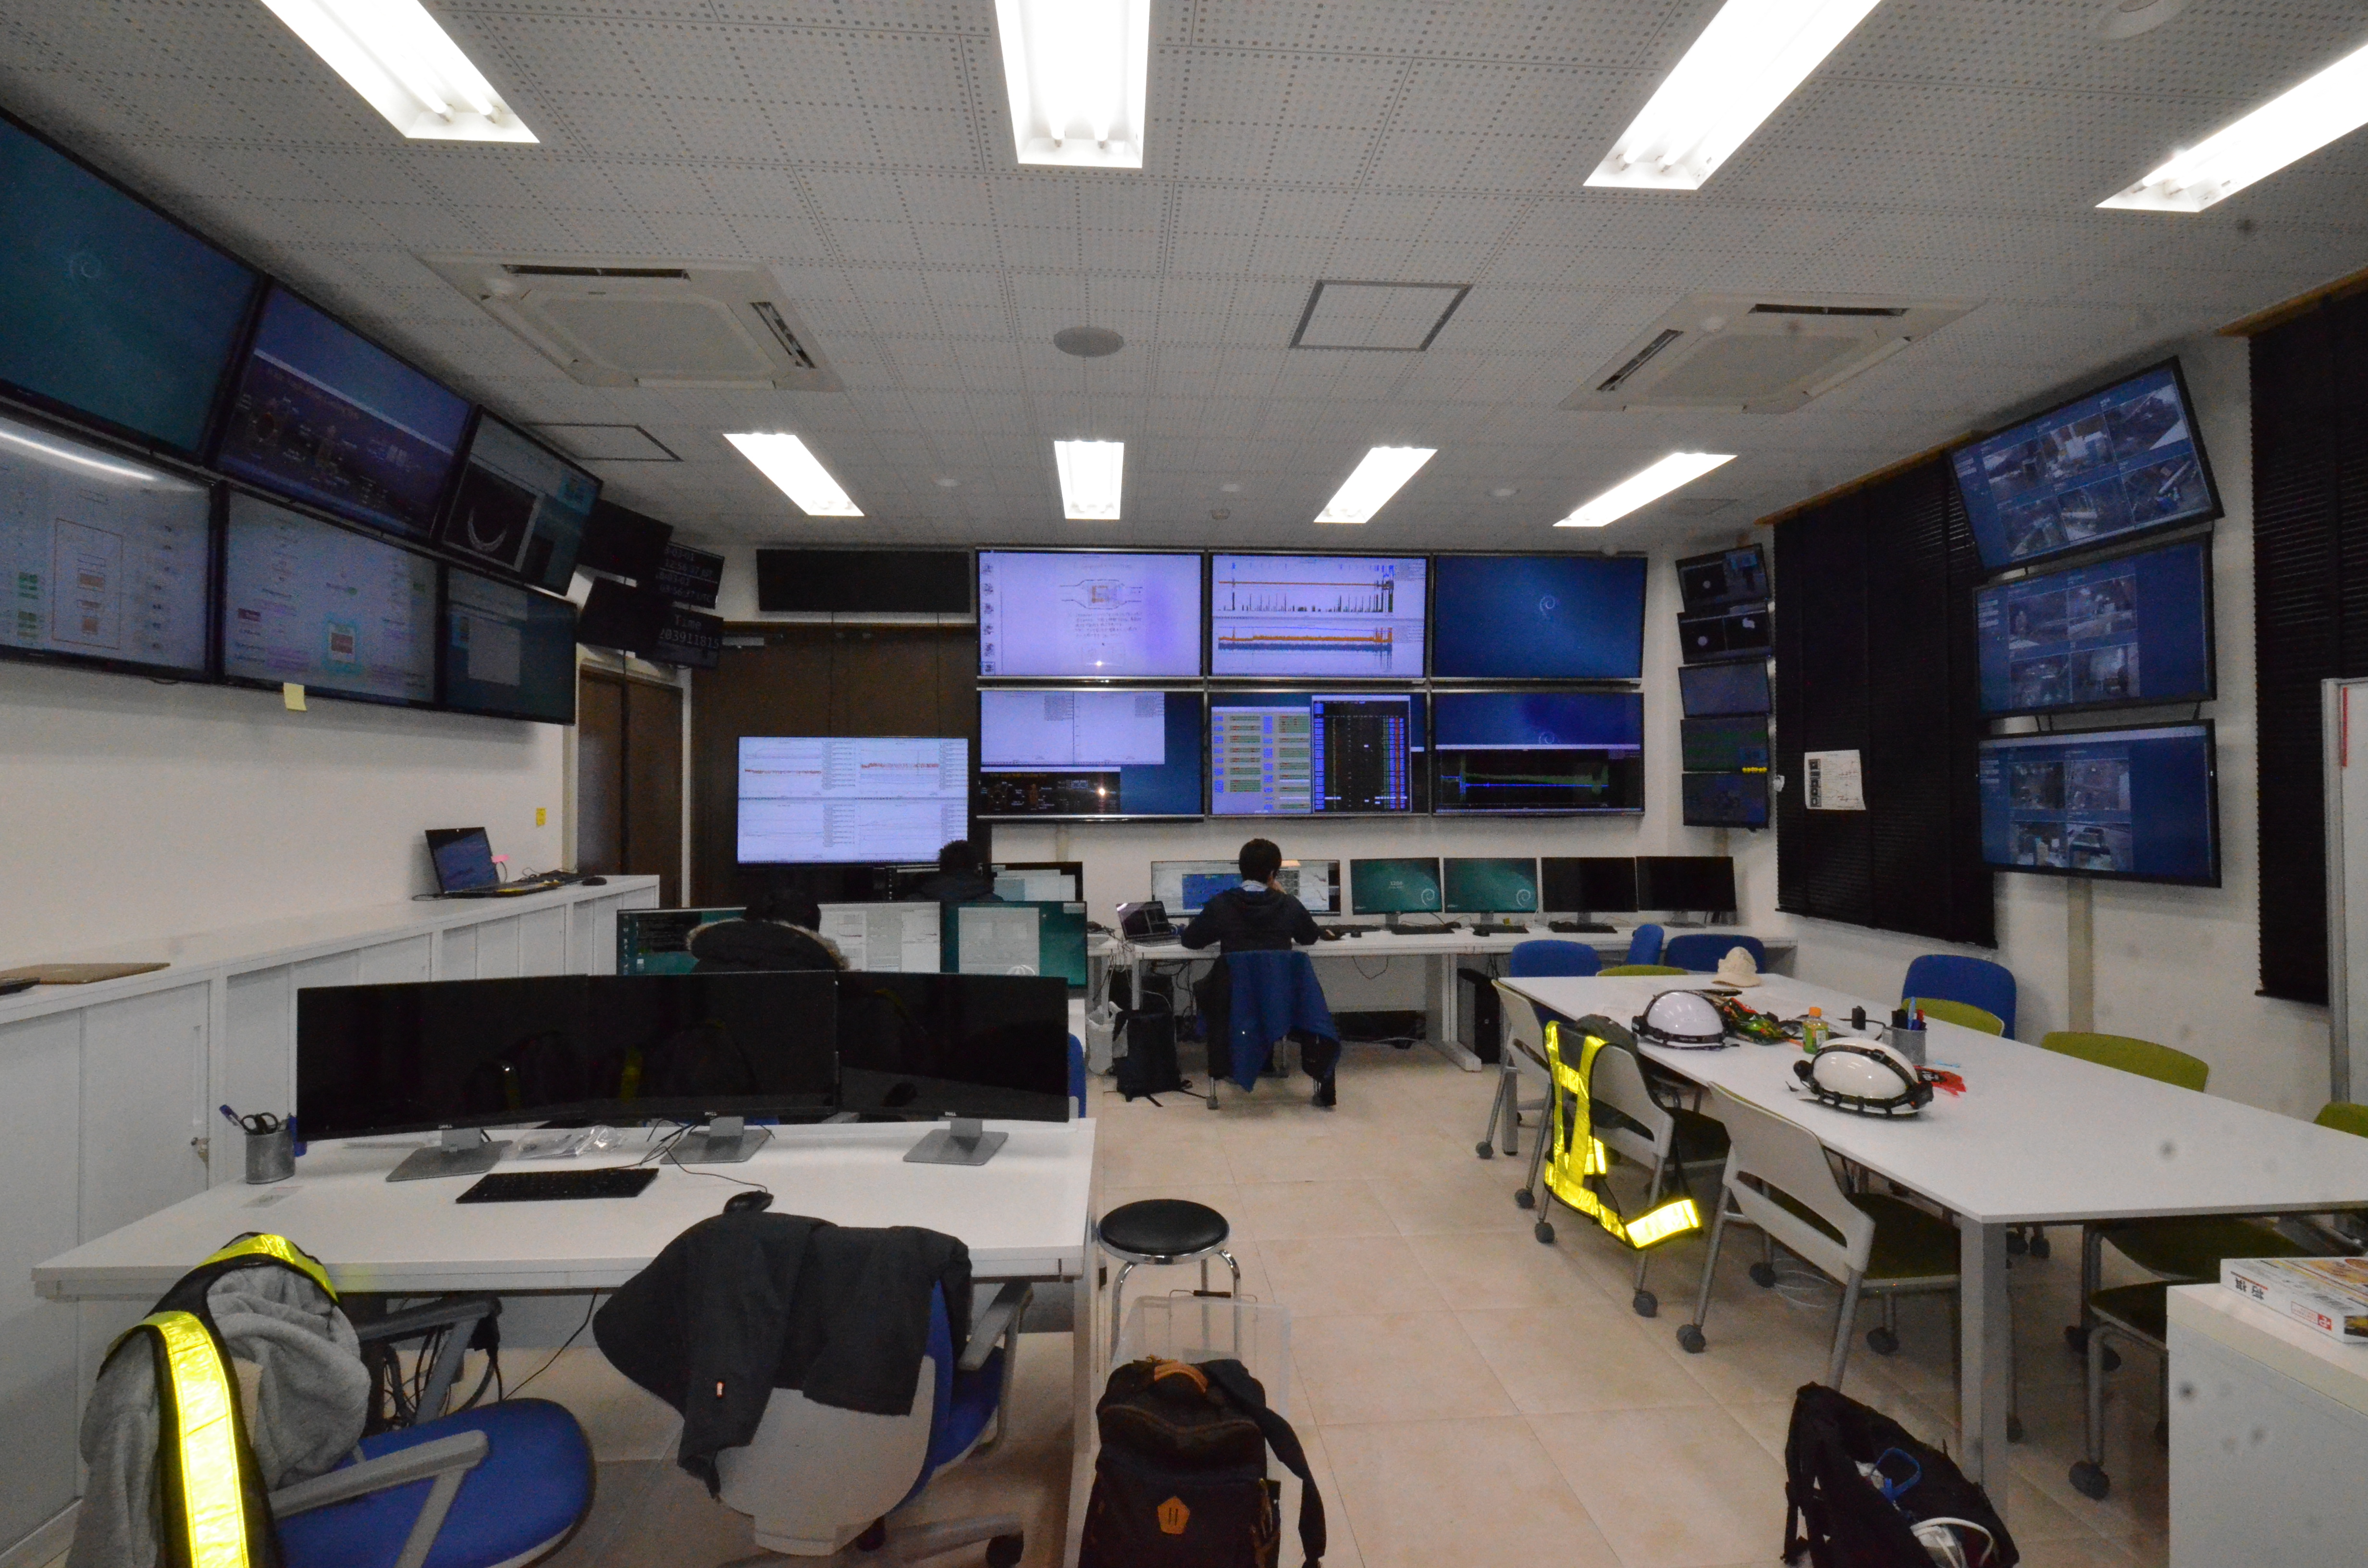 The control room to monitor all data from the KAGRA gravitational wave telescope.